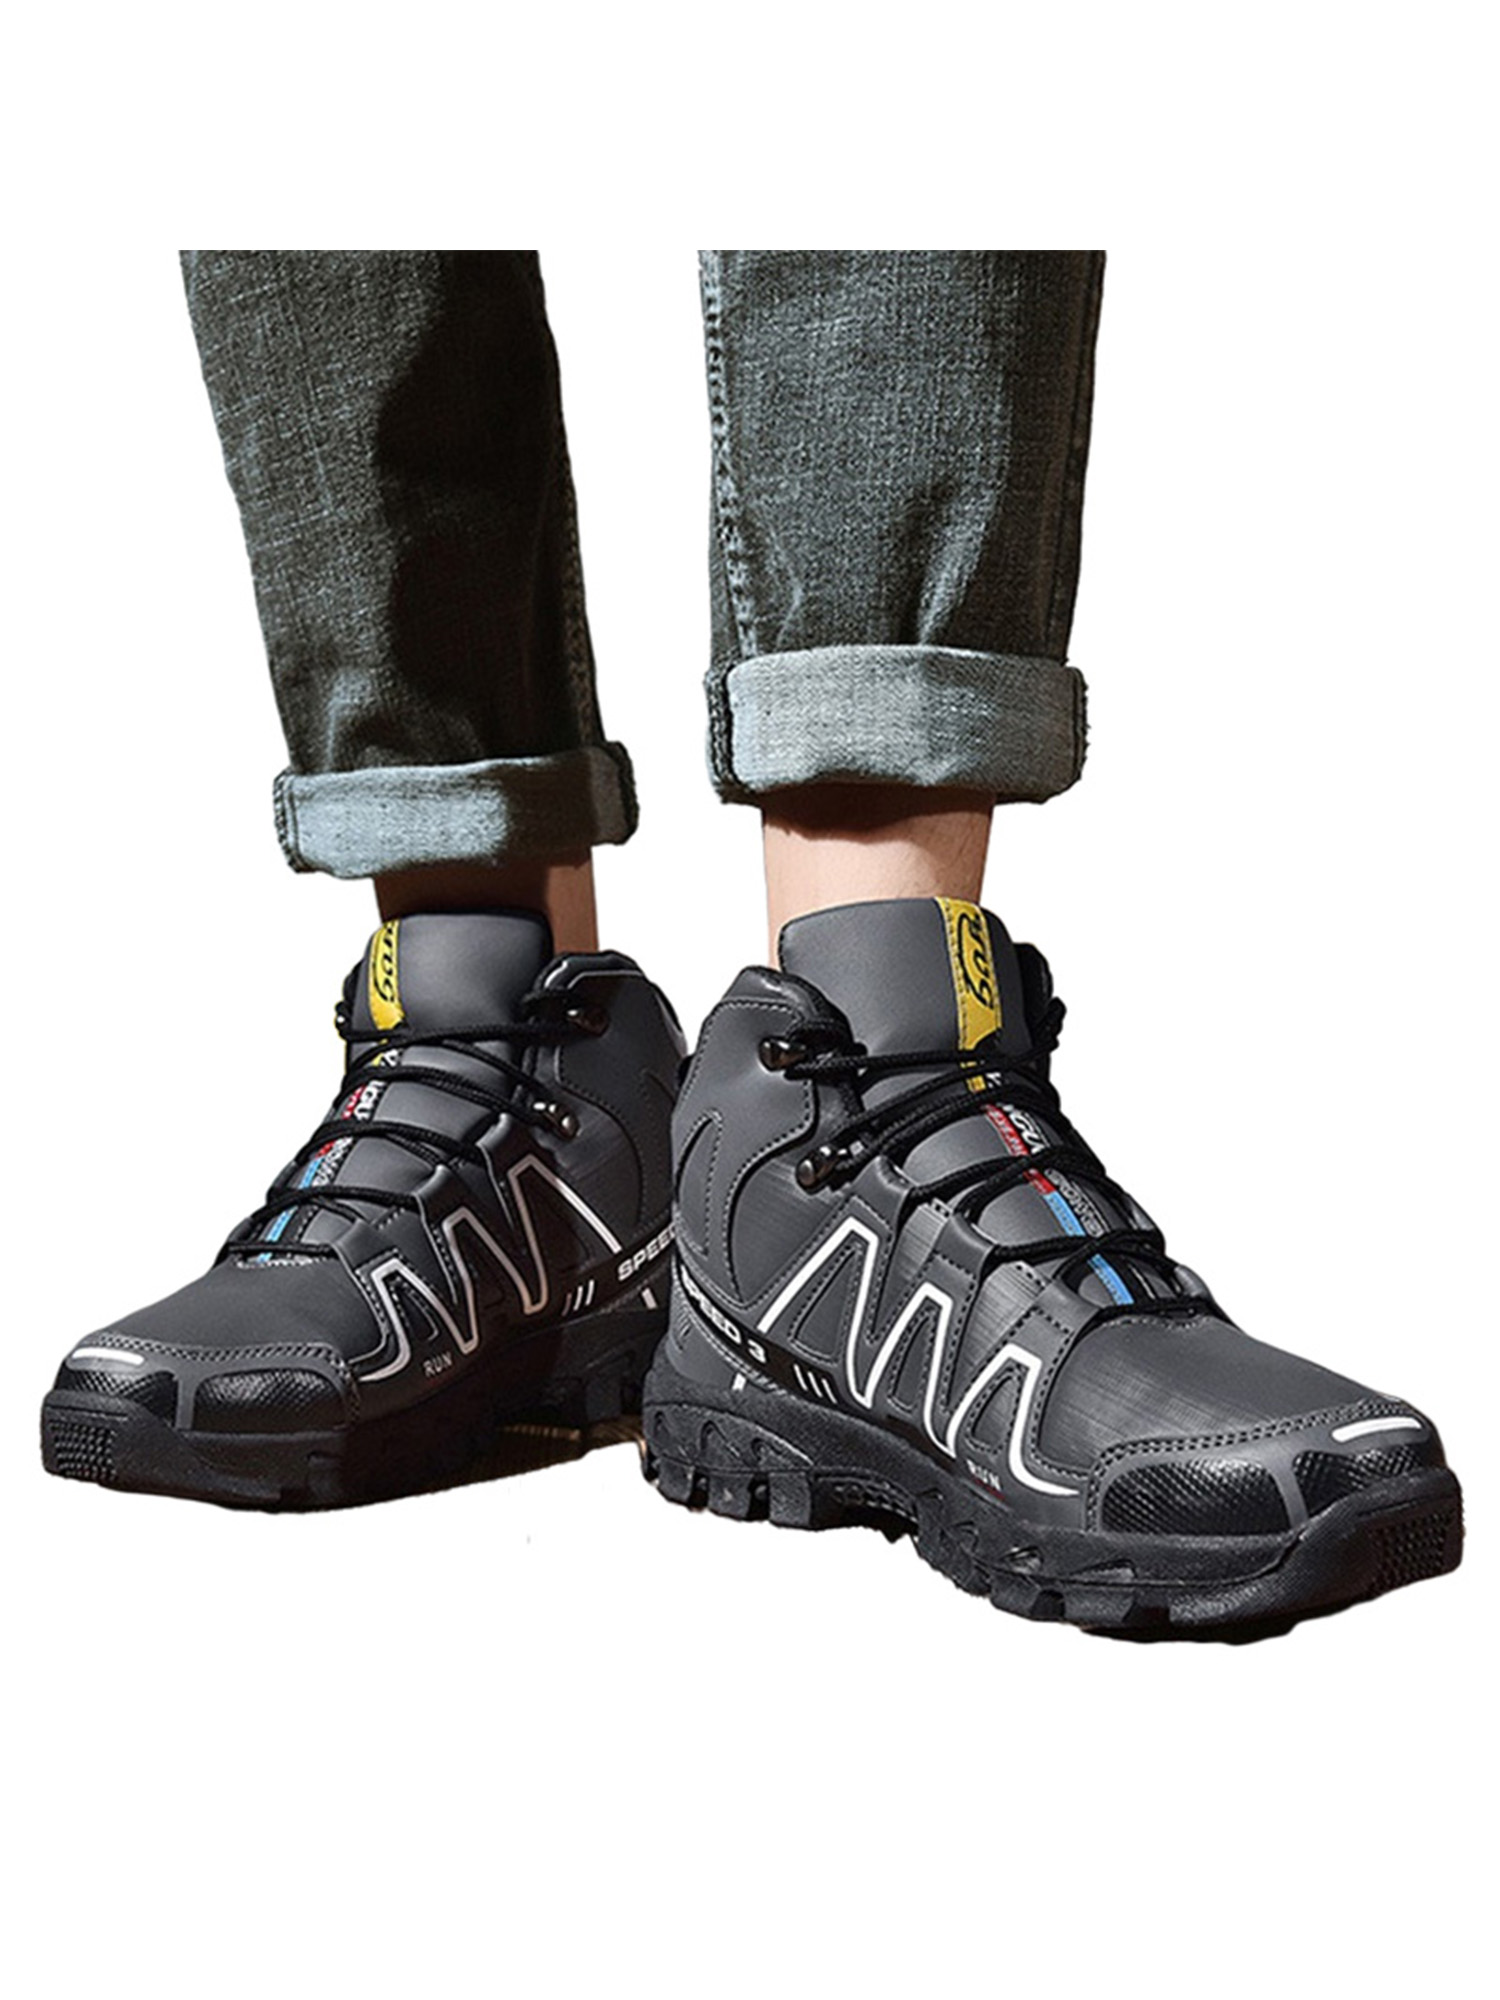 Avamo Mens Leather Steel Toe Cap Safety Work Boots Trainers Lace Up Shoes-Slip Resistant Industrial Construction Shoes - image 1 of 5